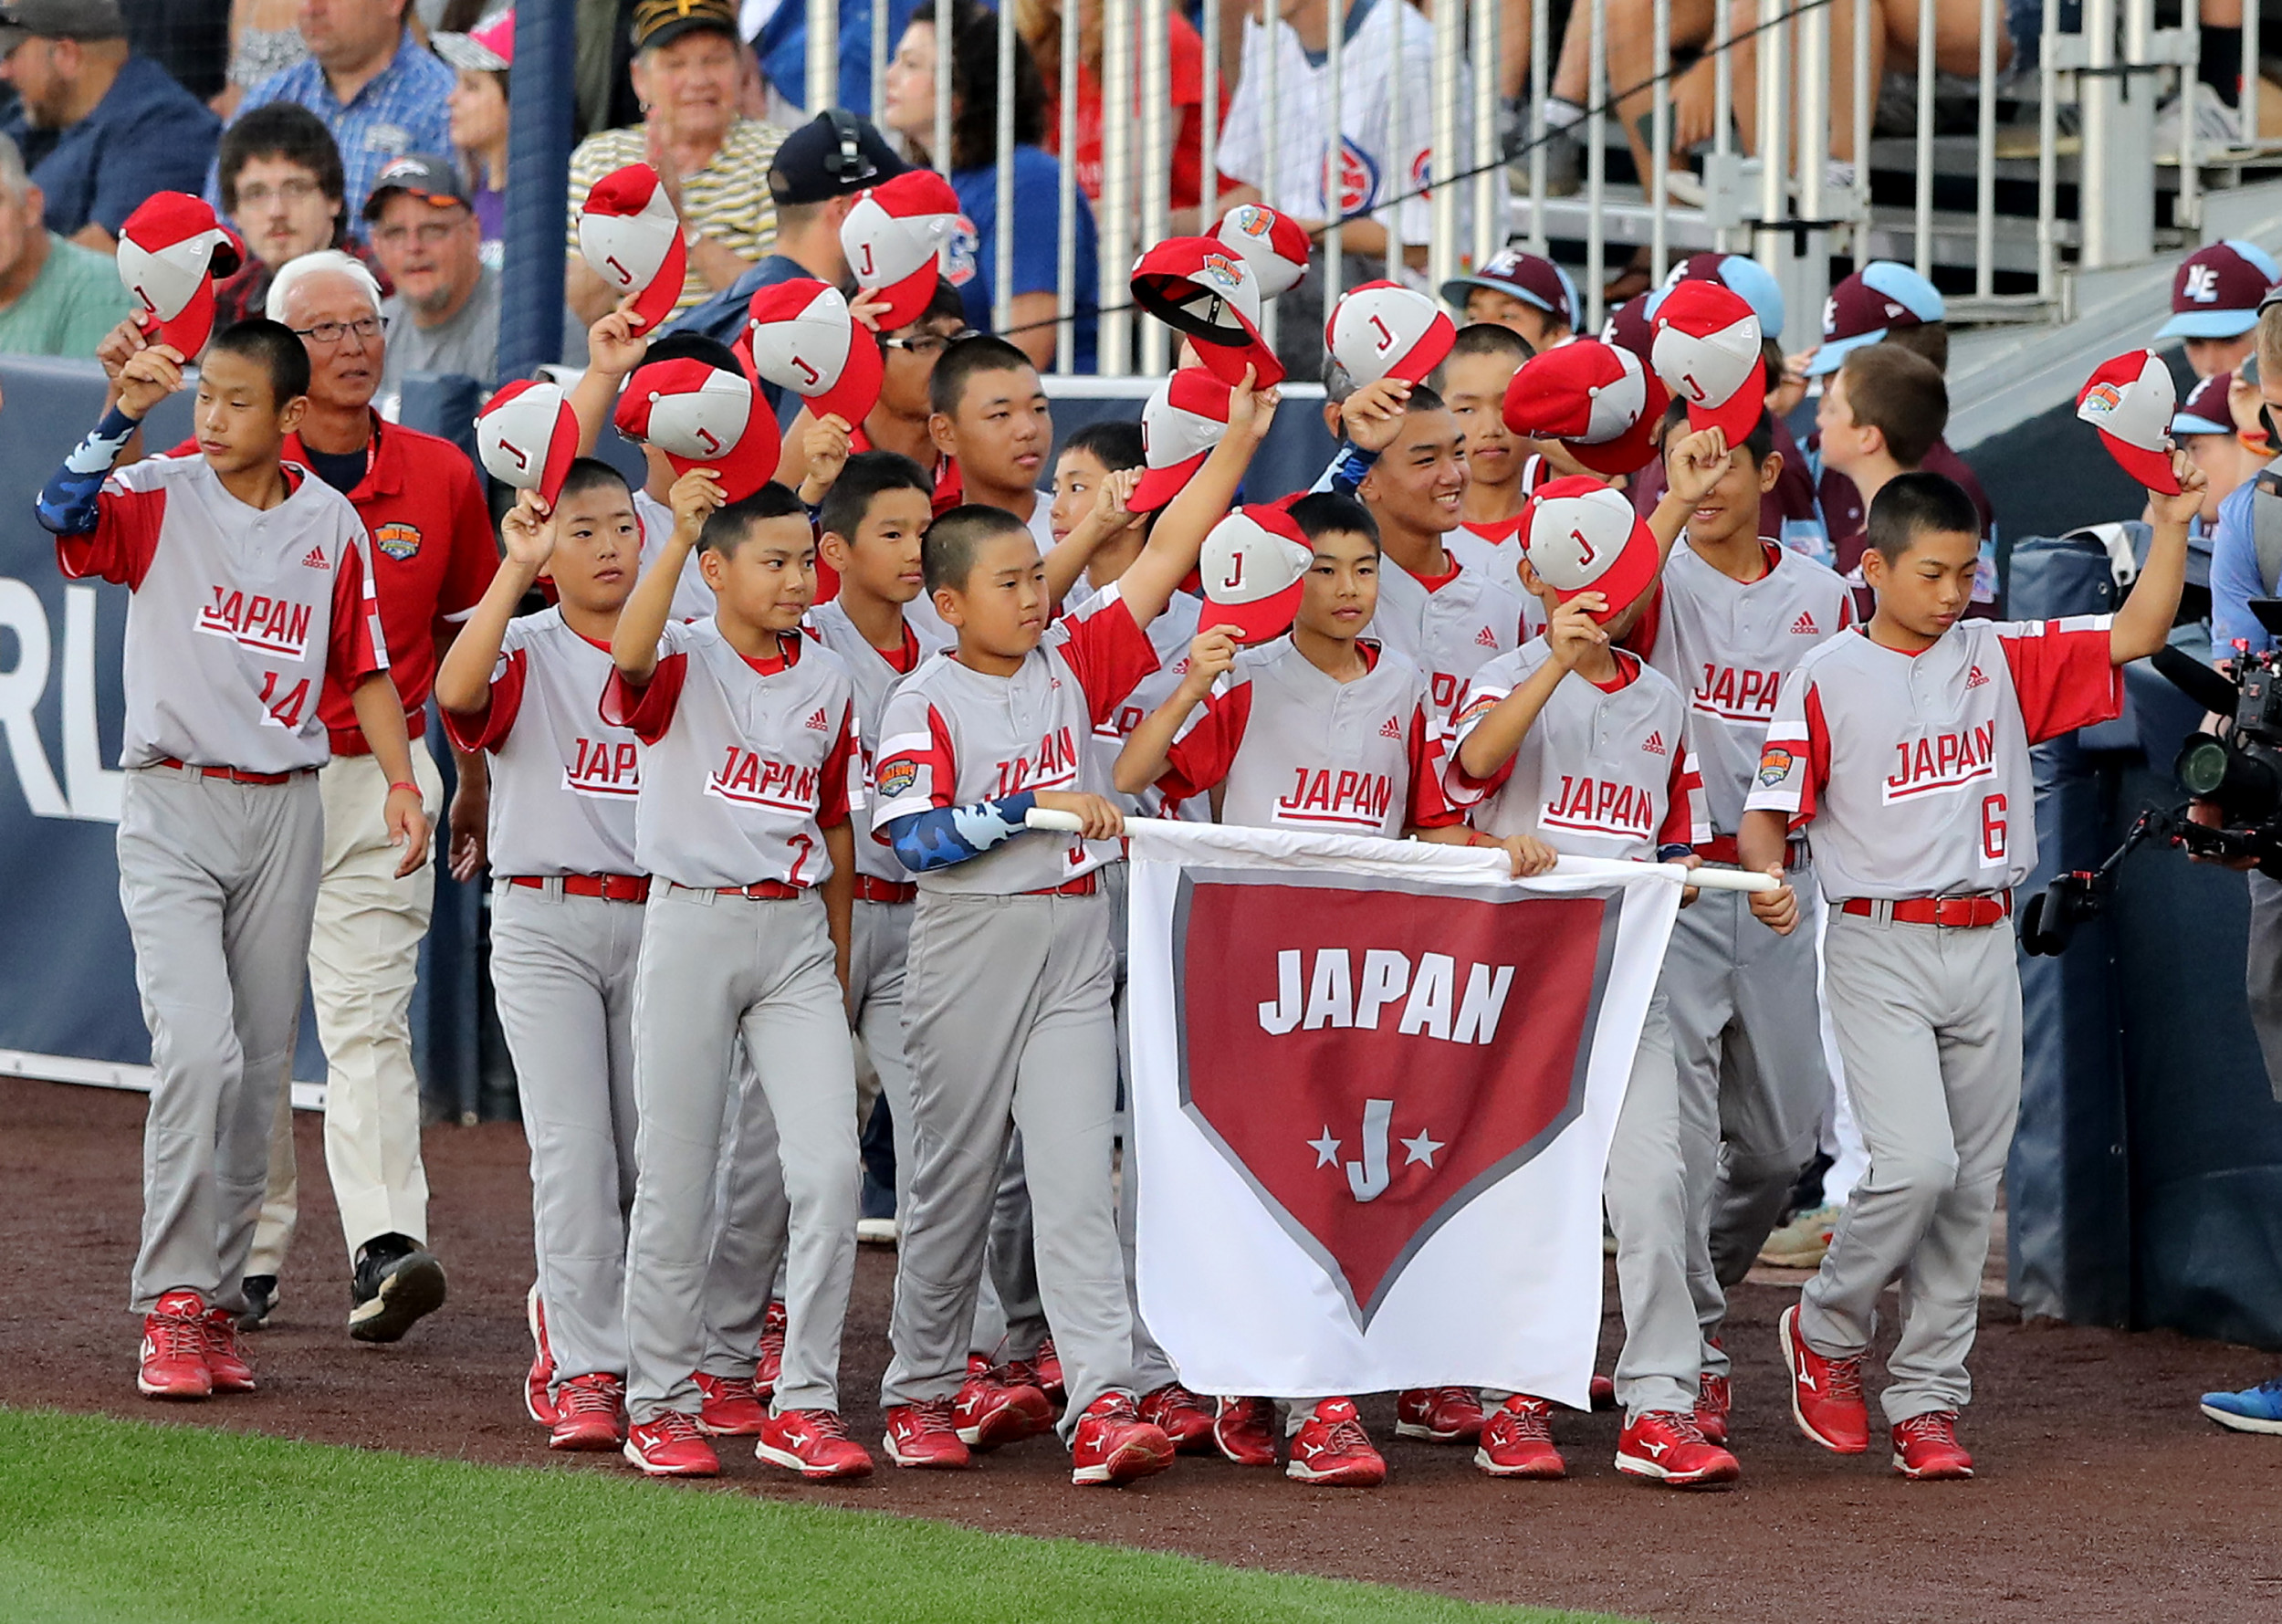 2019 Little League World Series Updated Bracket, Where to Watch, Live